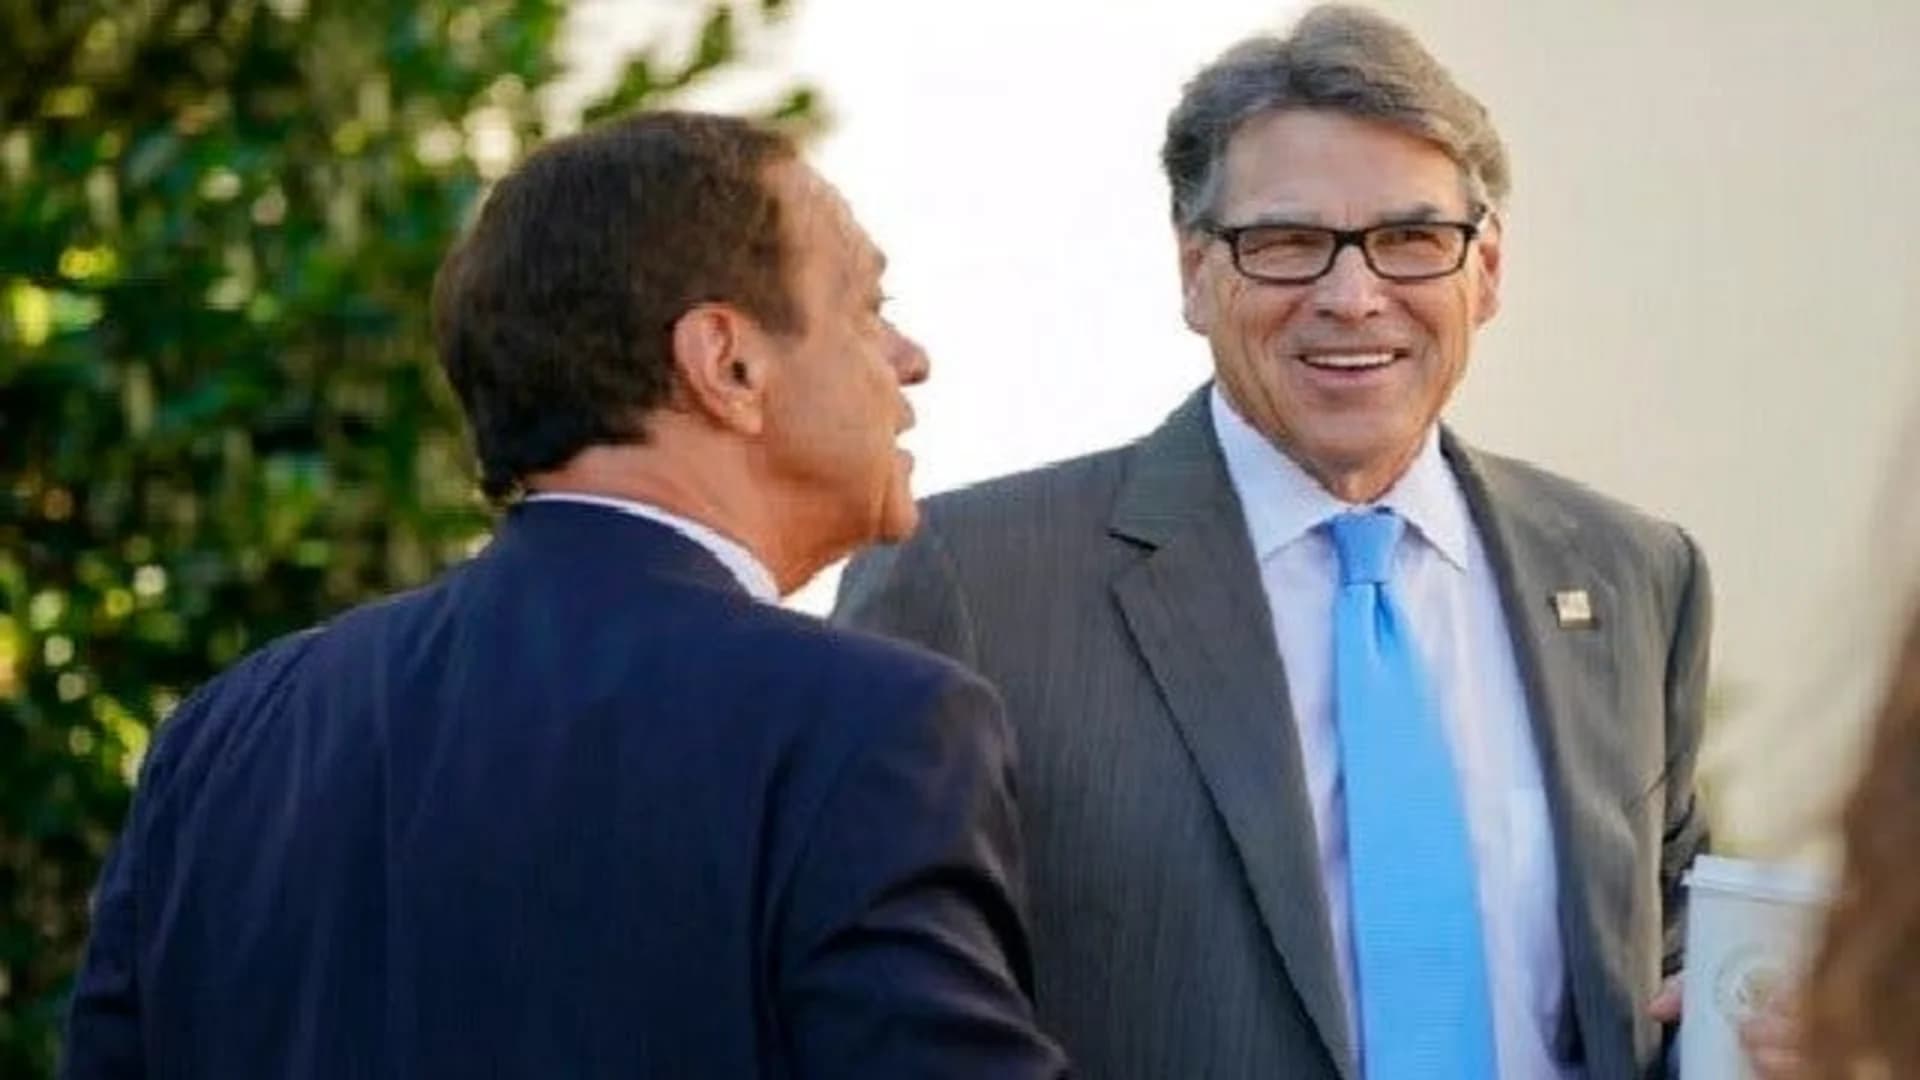 Rick Perry duped by Russian duo impersonating Ukraine leader